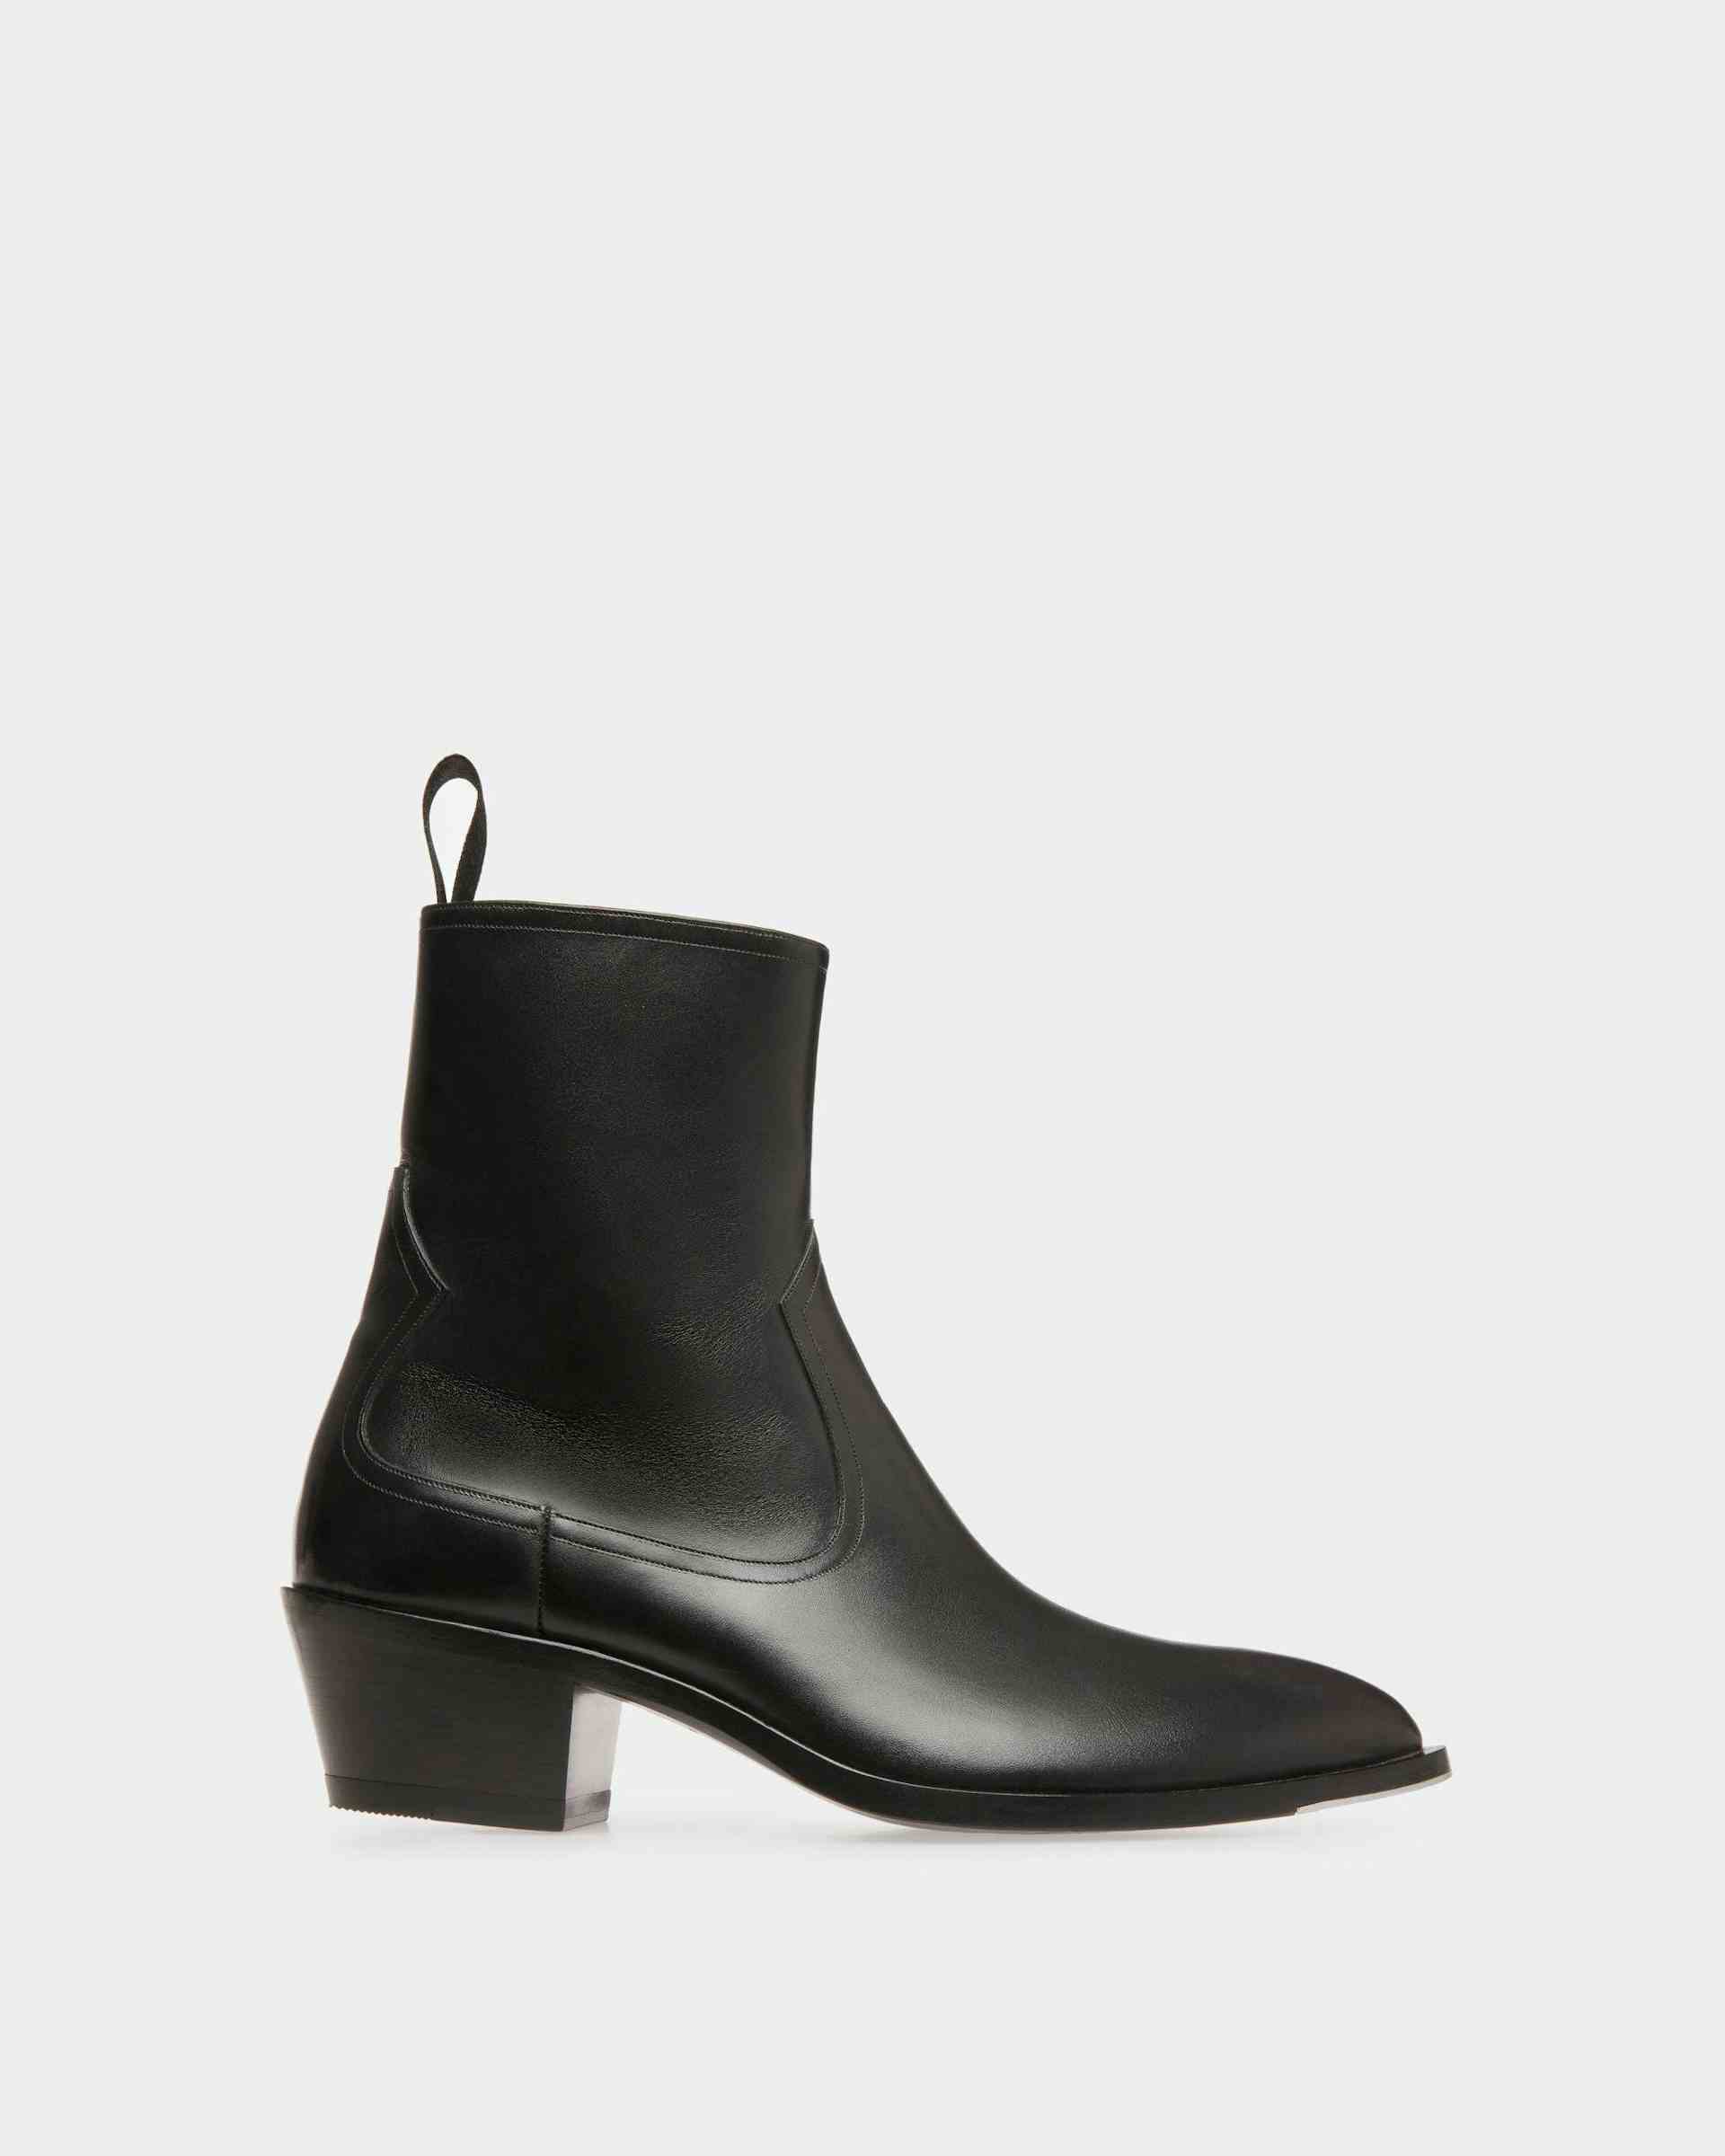 Vegas Boots In Black Leather - Women's - Bally